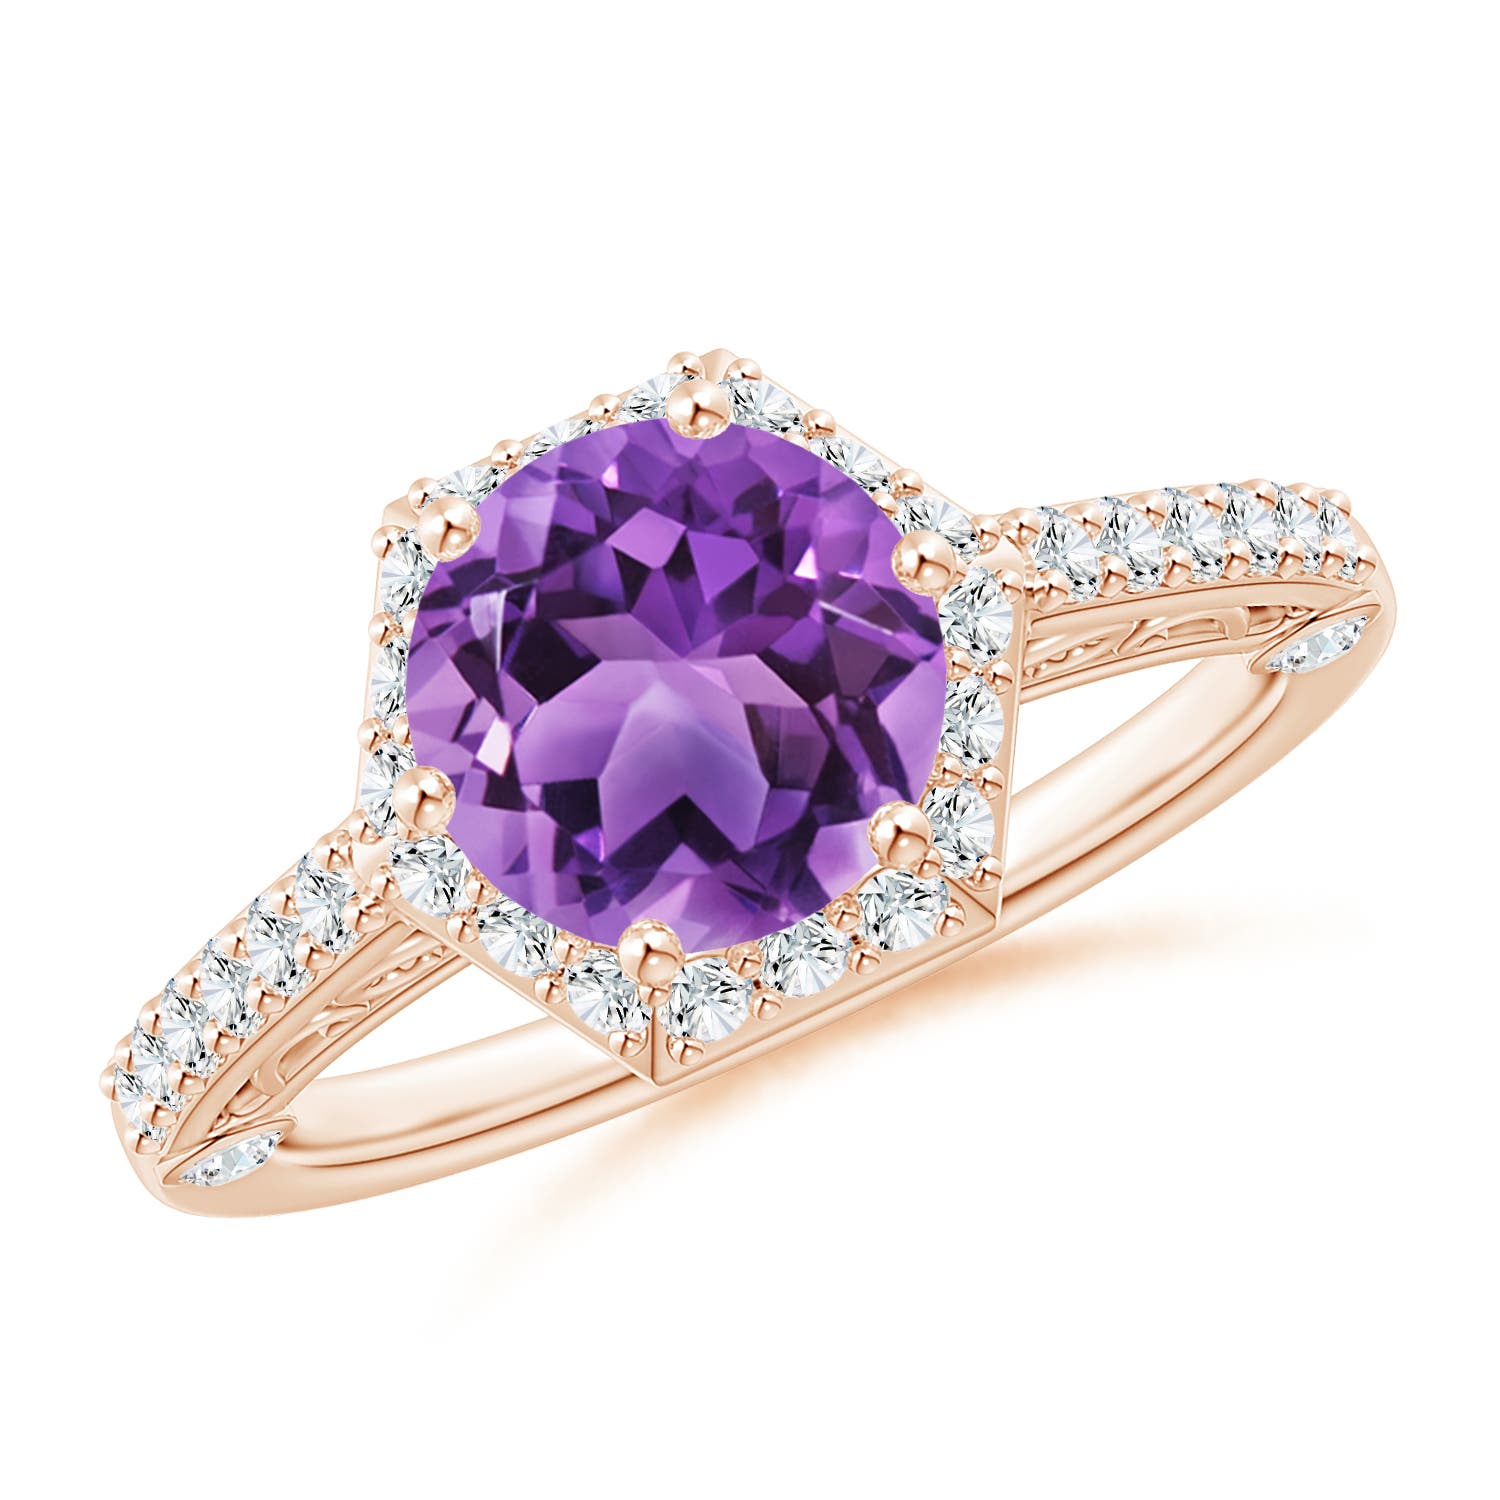 AA - Amethyst / 2.14 CT / 14 KT Rose Gold